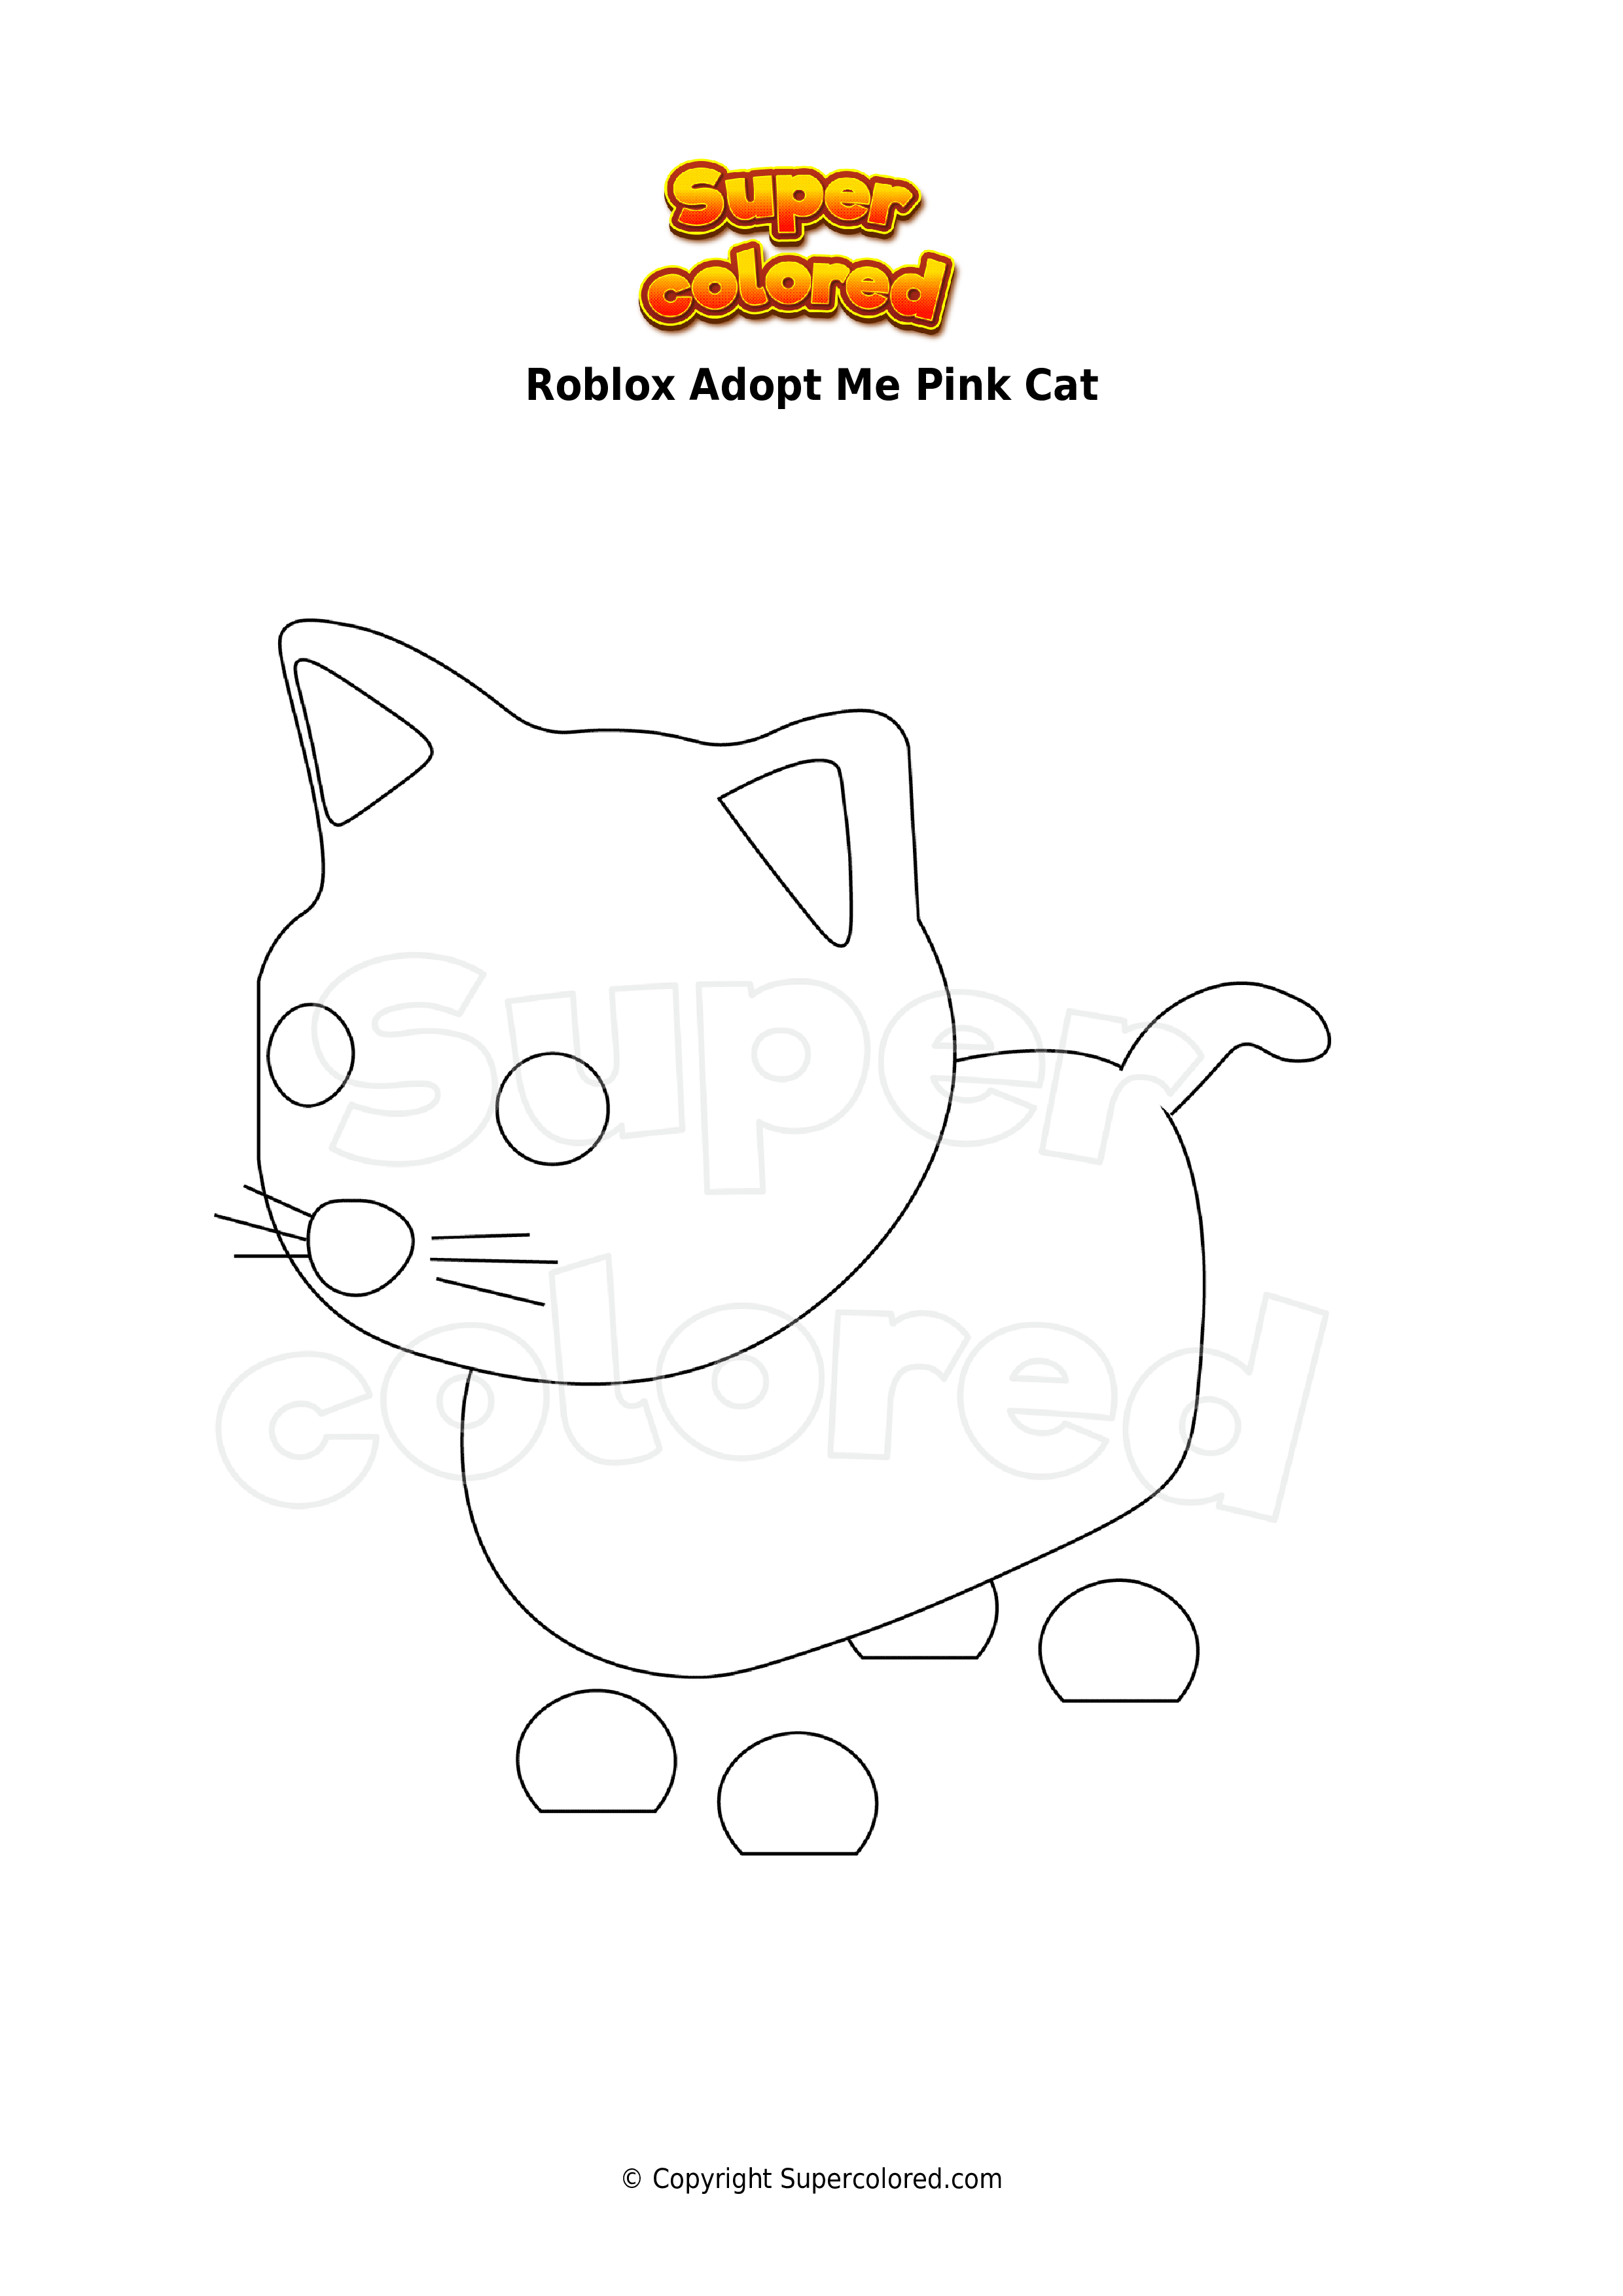 Roblox Adopt Me Pink Cat Coloring Page Printable | My XXX Hot Girl